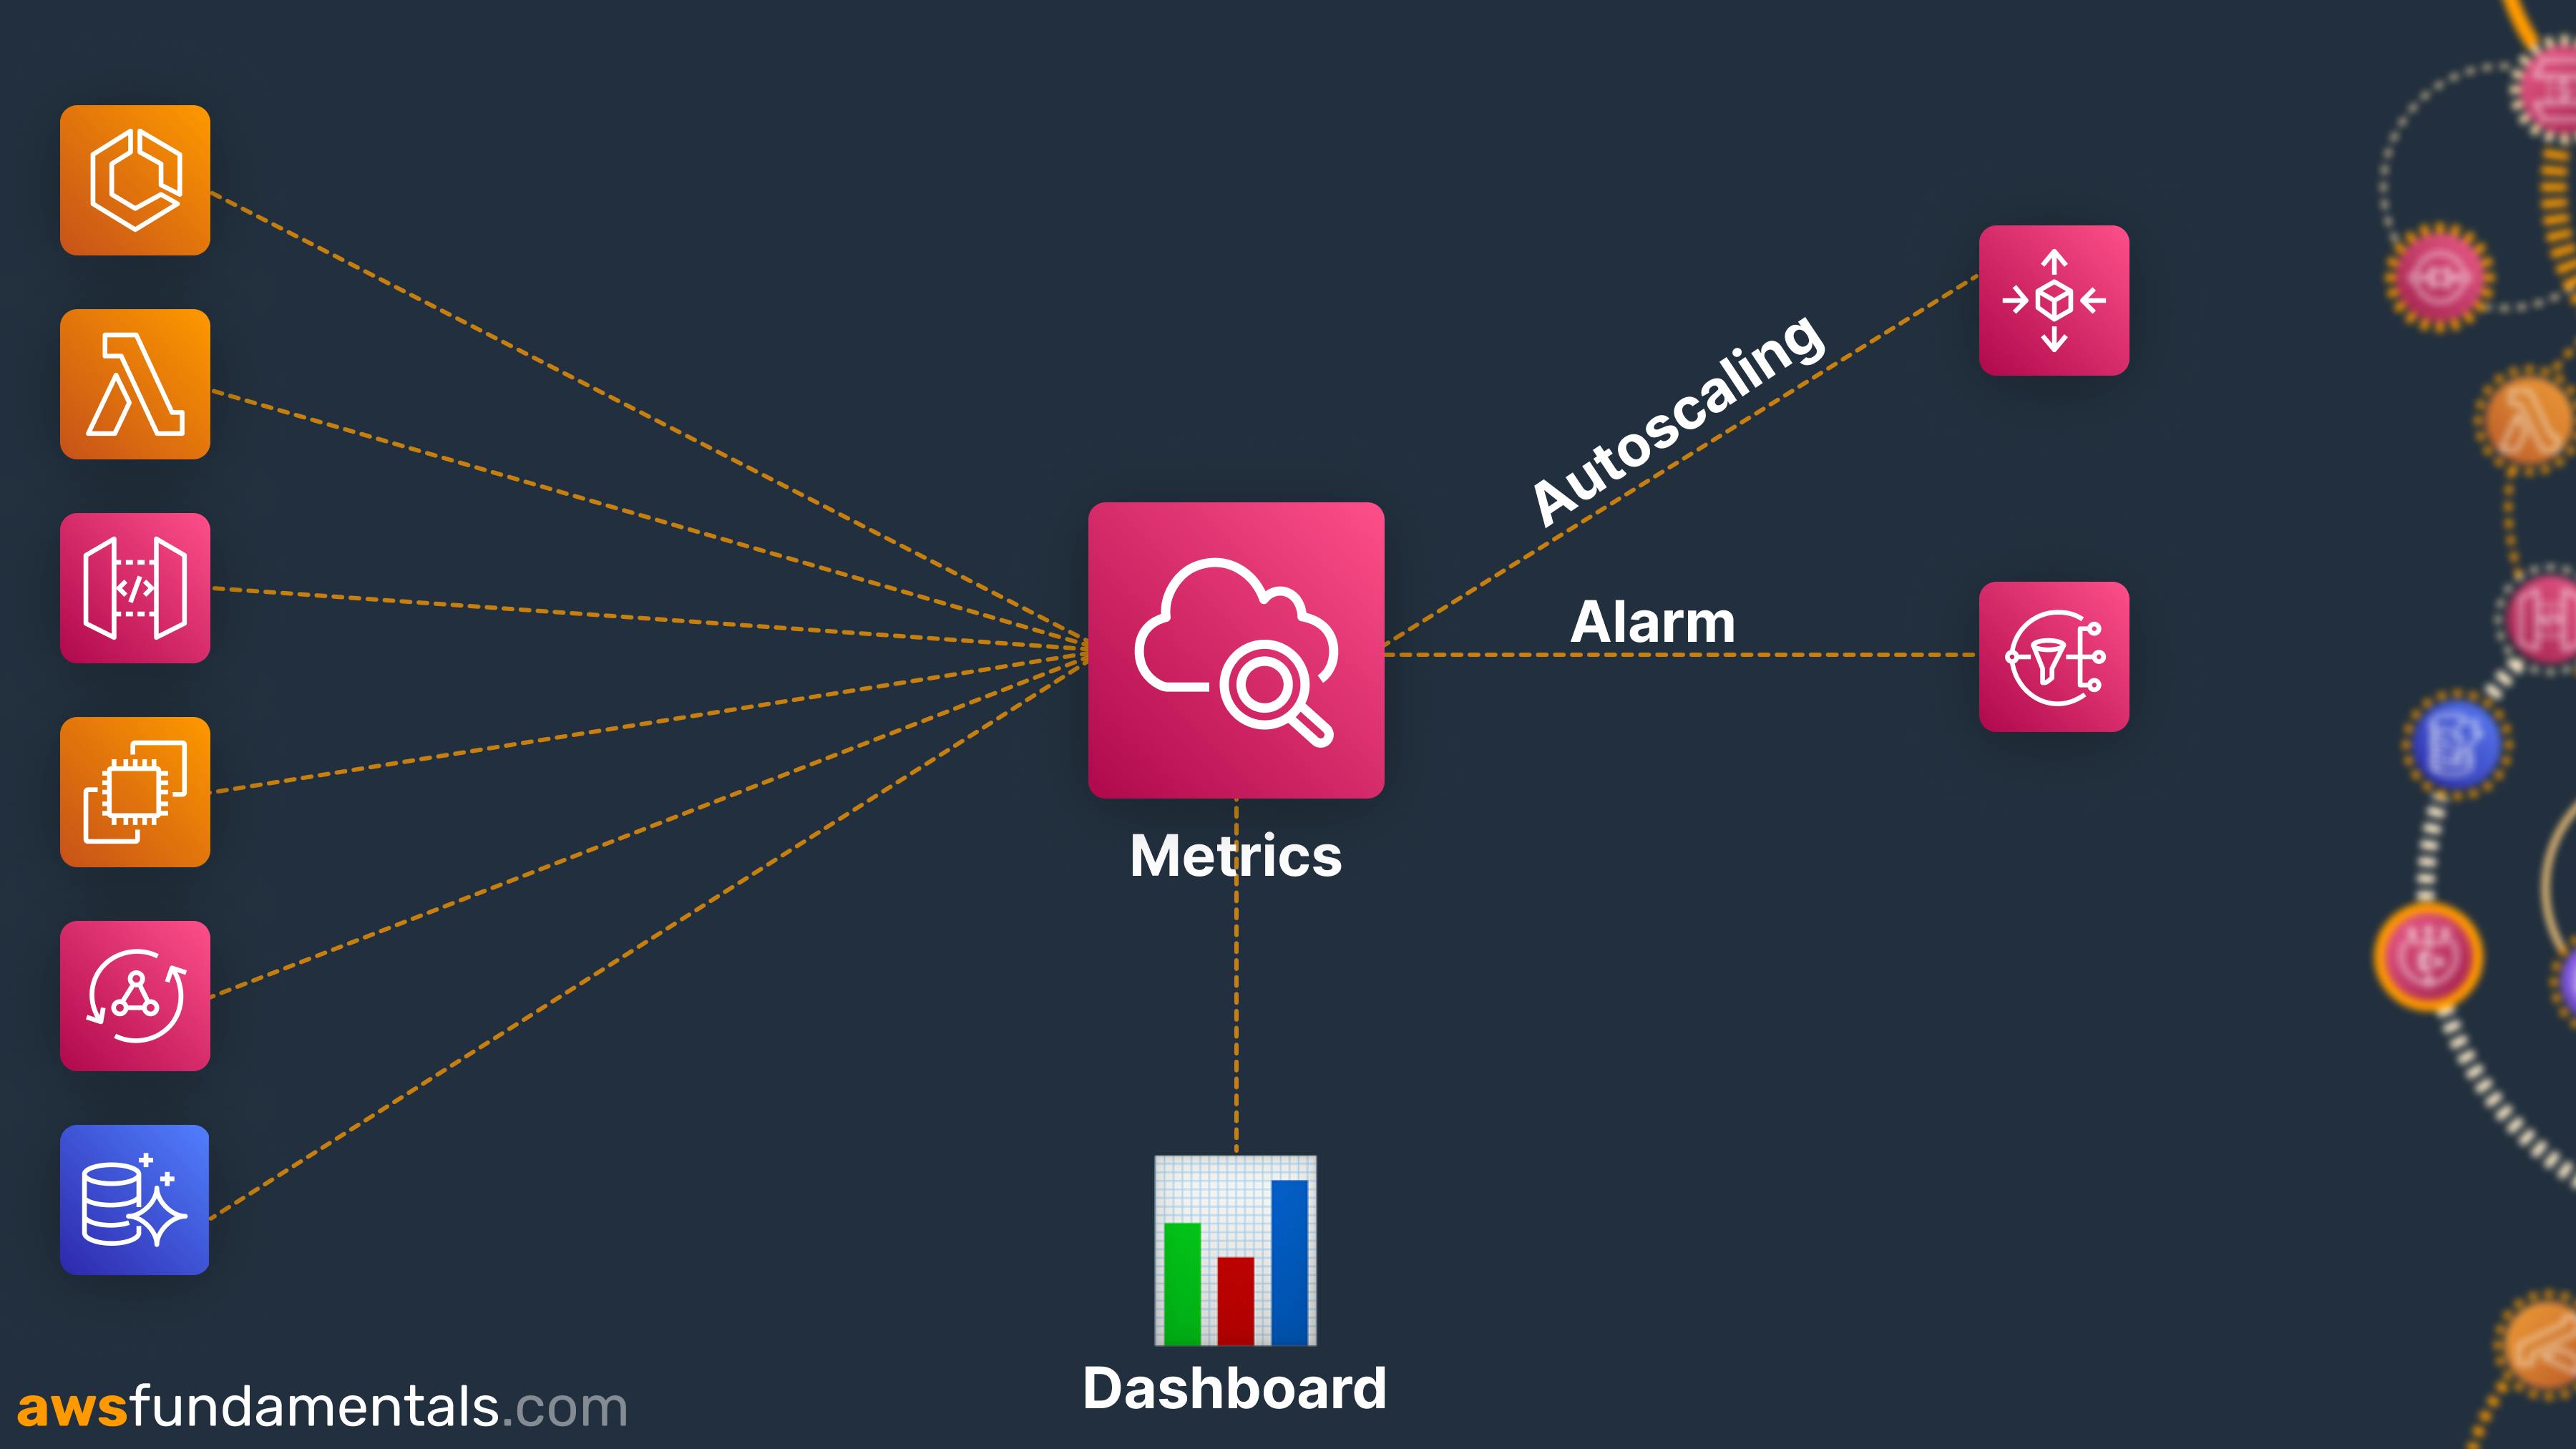 CloudWatch Metrics collect metrics from all services